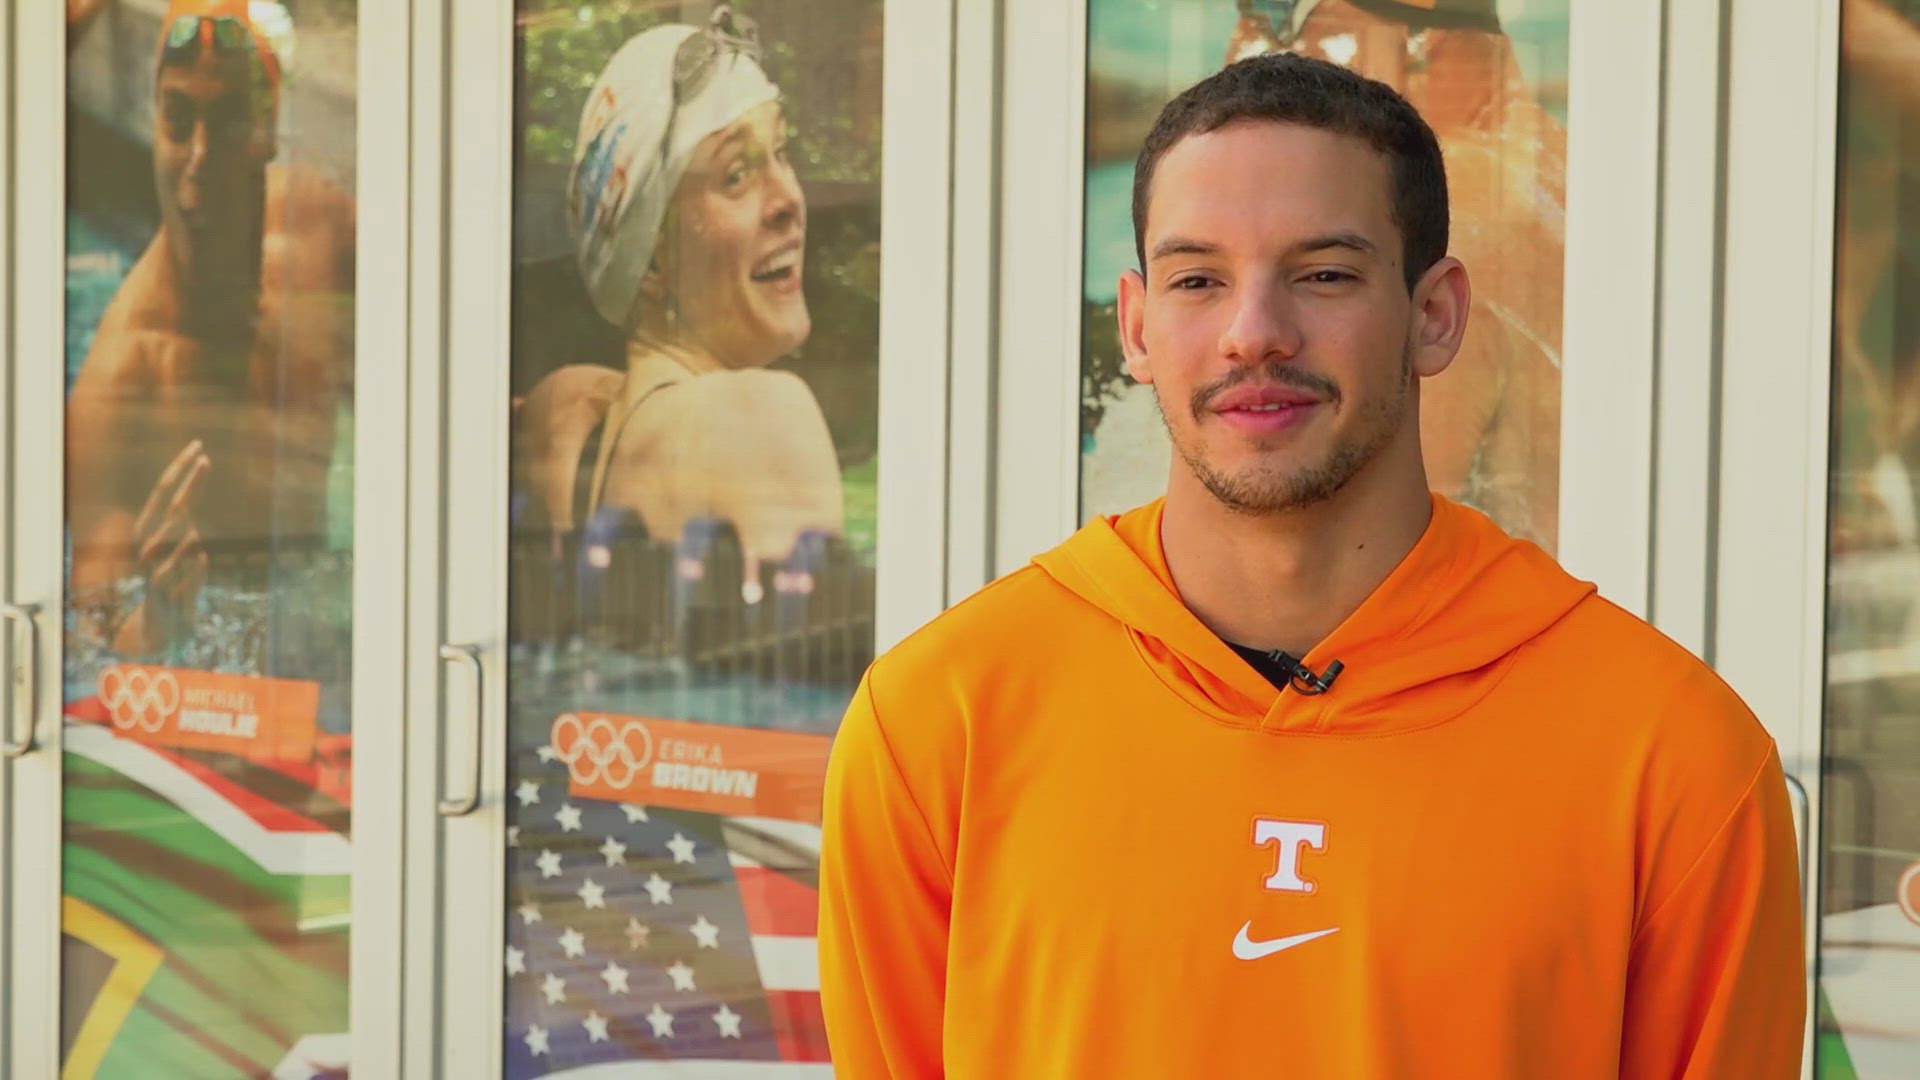 Guihlerme Santos is preparing for the Olympics at UT. He tells us why at the age of 14 he suddenly stopped swimming for a year and did not even want to touch water.